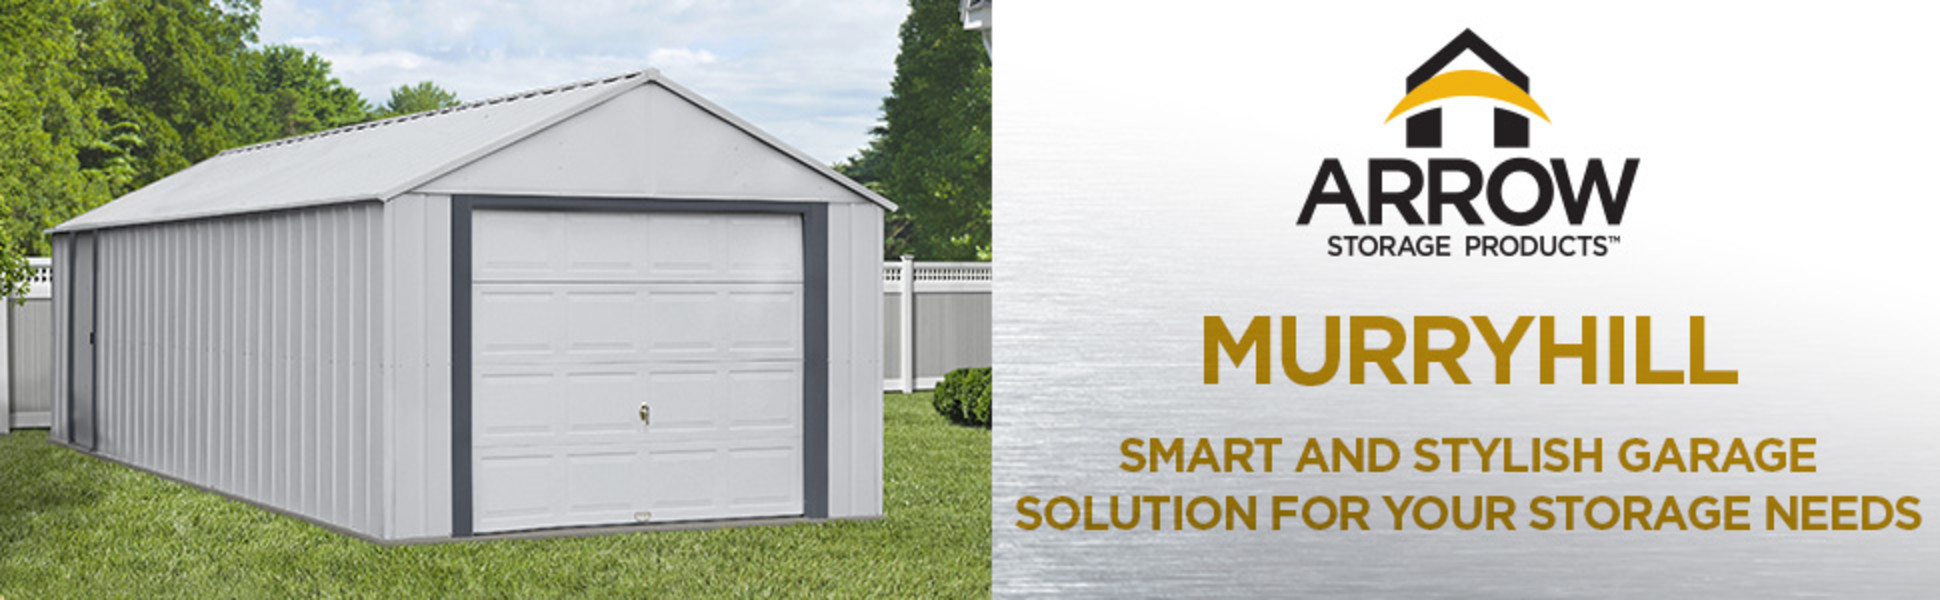 ARROW Storage Products Murryhill Garage - Smart and stylish garage solution for your storage needs